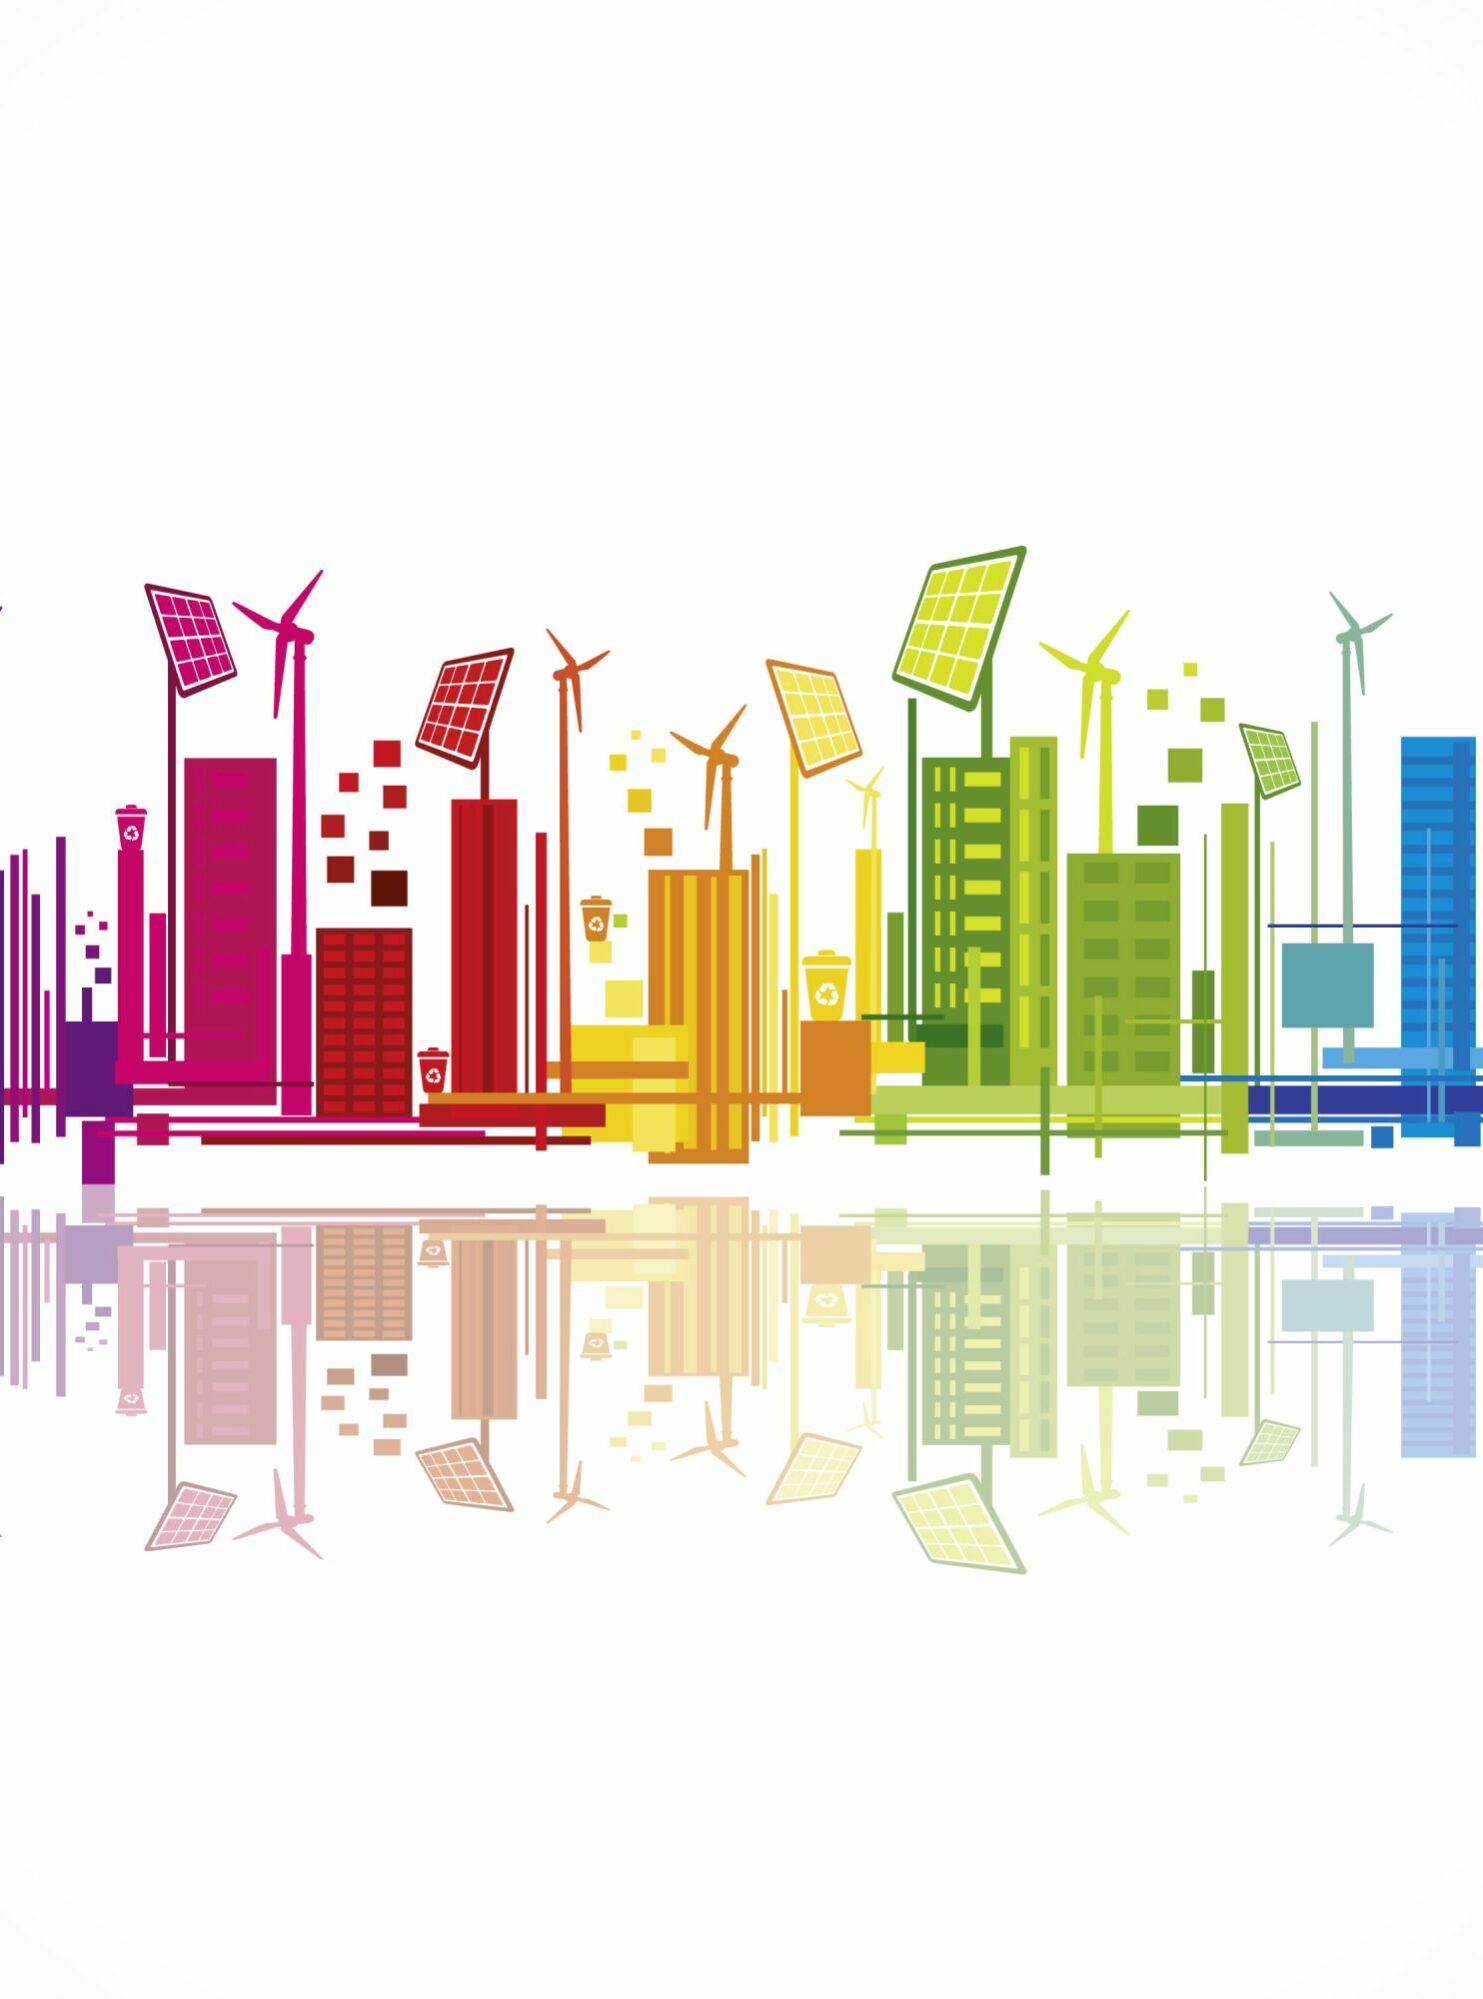 Graphics showing a city making use of renewable energies.